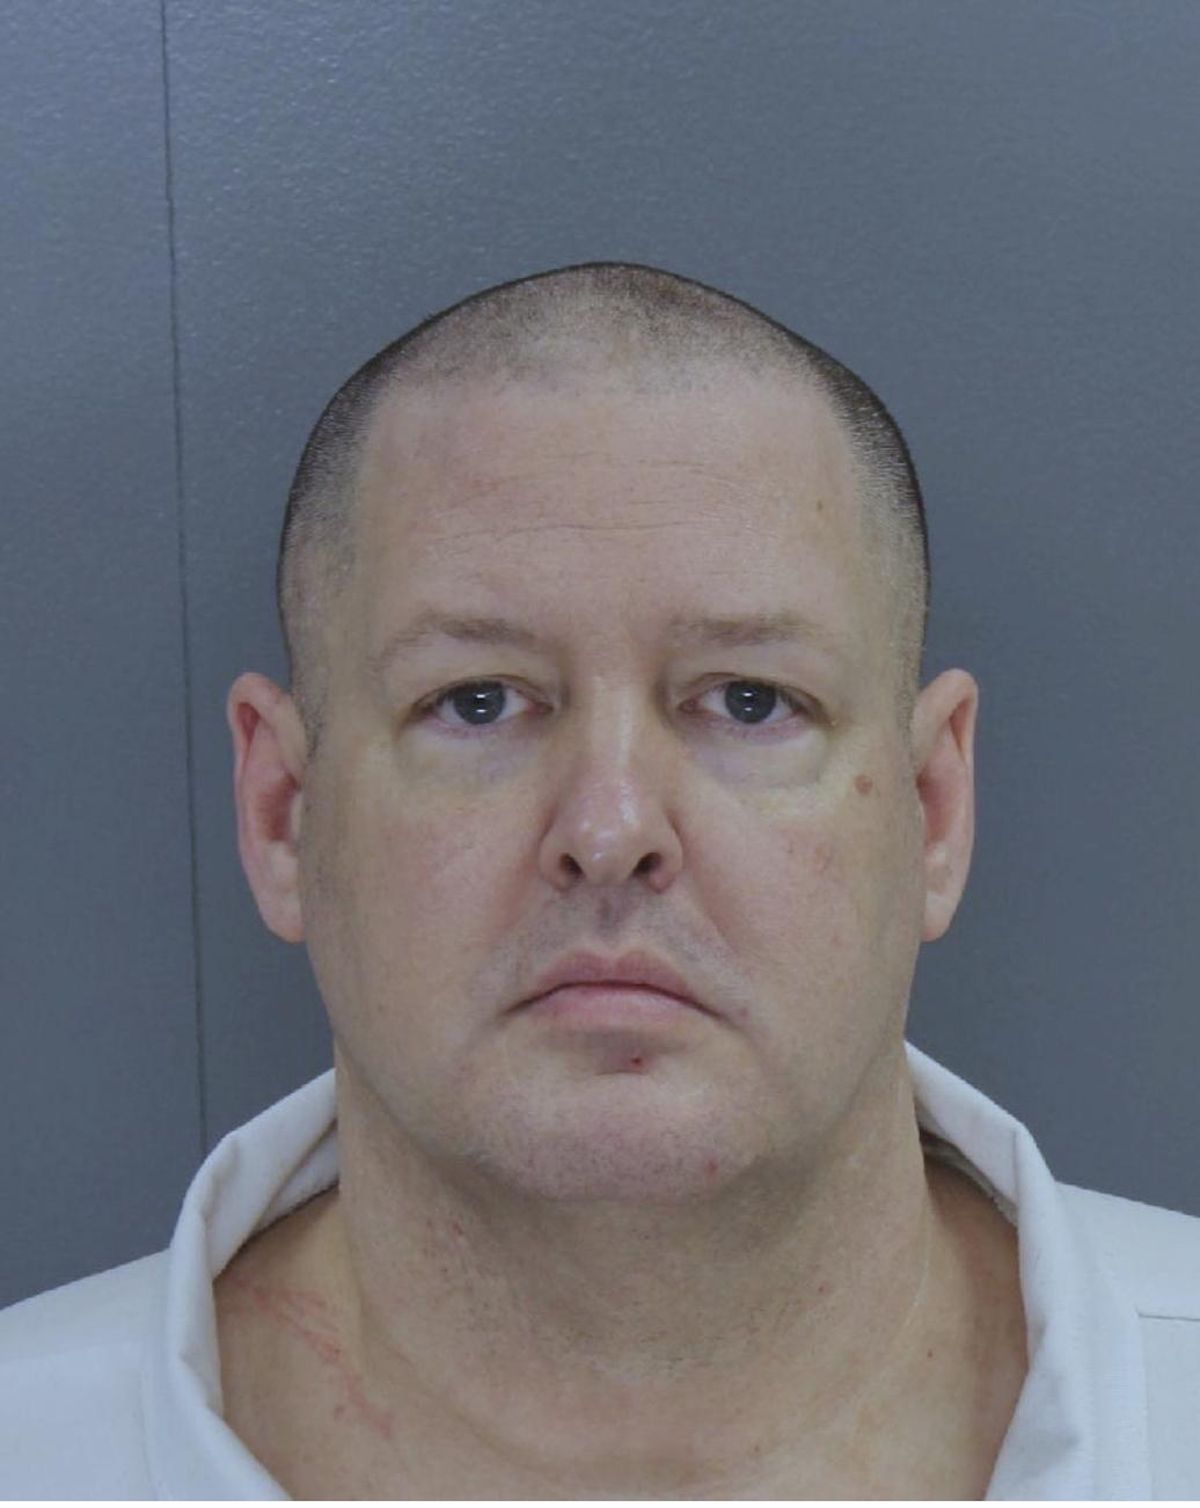 This photo provided by South Carolina state shows Todd Kohlhepp. New investigative videos released by prosecutors show the dramatic rescue of a woman who had been chained inside a metal storage container for about two months by Kohlhepp. The videos also show Kohlhepp confessing to killing seven people in South Carolina. He pleaded guilty two weeks ago to avoid the death penalty and was sentenced to life in prison. On Friday, prosecutors released several videos, dozens of pictures and hundreds of pages of evidence against him. (South Carolina state)